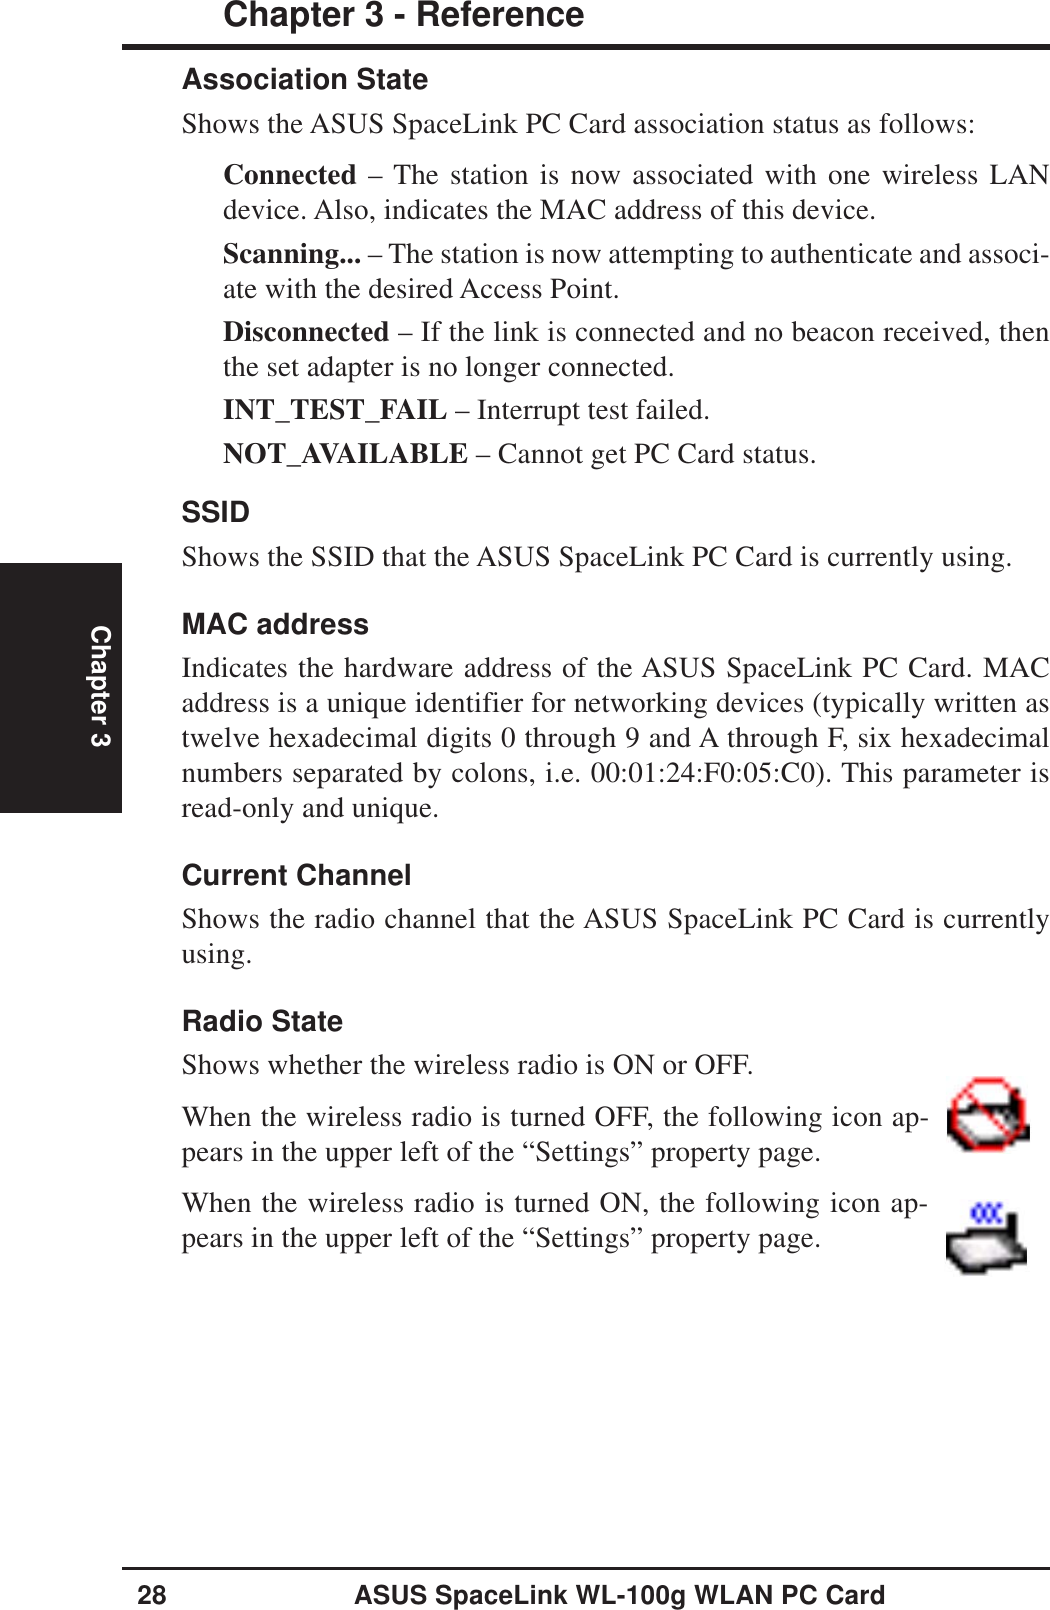 28 ASUS SpaceLink WL-100g WLAN PC CardChapter 3 - ReferenceChapter 3Association StateShows the ASUS SpaceLink PC Card association status as follows:Connected – The station is now associated with one wireless LANdevice. Also, indicates the MAC address of this device.Scanning... – The station is now attempting to authenticate and associ-ate with the desired Access Point.Disconnected – If the link is connected and no beacon received, thenthe set adapter is no longer connected.INT_TEST_FAIL – Interrupt test failed.NOT_AVAILABLE – Cannot get PC Card status.SSIDShows the SSID that the ASUS SpaceLink PC Card is currently using.MAC addressIndicates the hardware address of the ASUS SpaceLink PC Card. MACaddress is a unique identifier for networking devices (typically written astwelve hexadecimal digits 0 through 9 and A through F, six hexadecimalnumbers separated by colons, i.e. 00:01:24:F0:05:C0). This parameter isread-only and unique.Current ChannelShows the radio channel that the ASUS SpaceLink PC Card is currentlyusing.Radio StateShows whether the wireless radio is ON or OFF.When the wireless radio is turned OFF, the following icon ap-pears in the upper left of the “Settings” property page.When the wireless radio is turned ON, the following icon ap-pears in the upper left of the “Settings” property page.